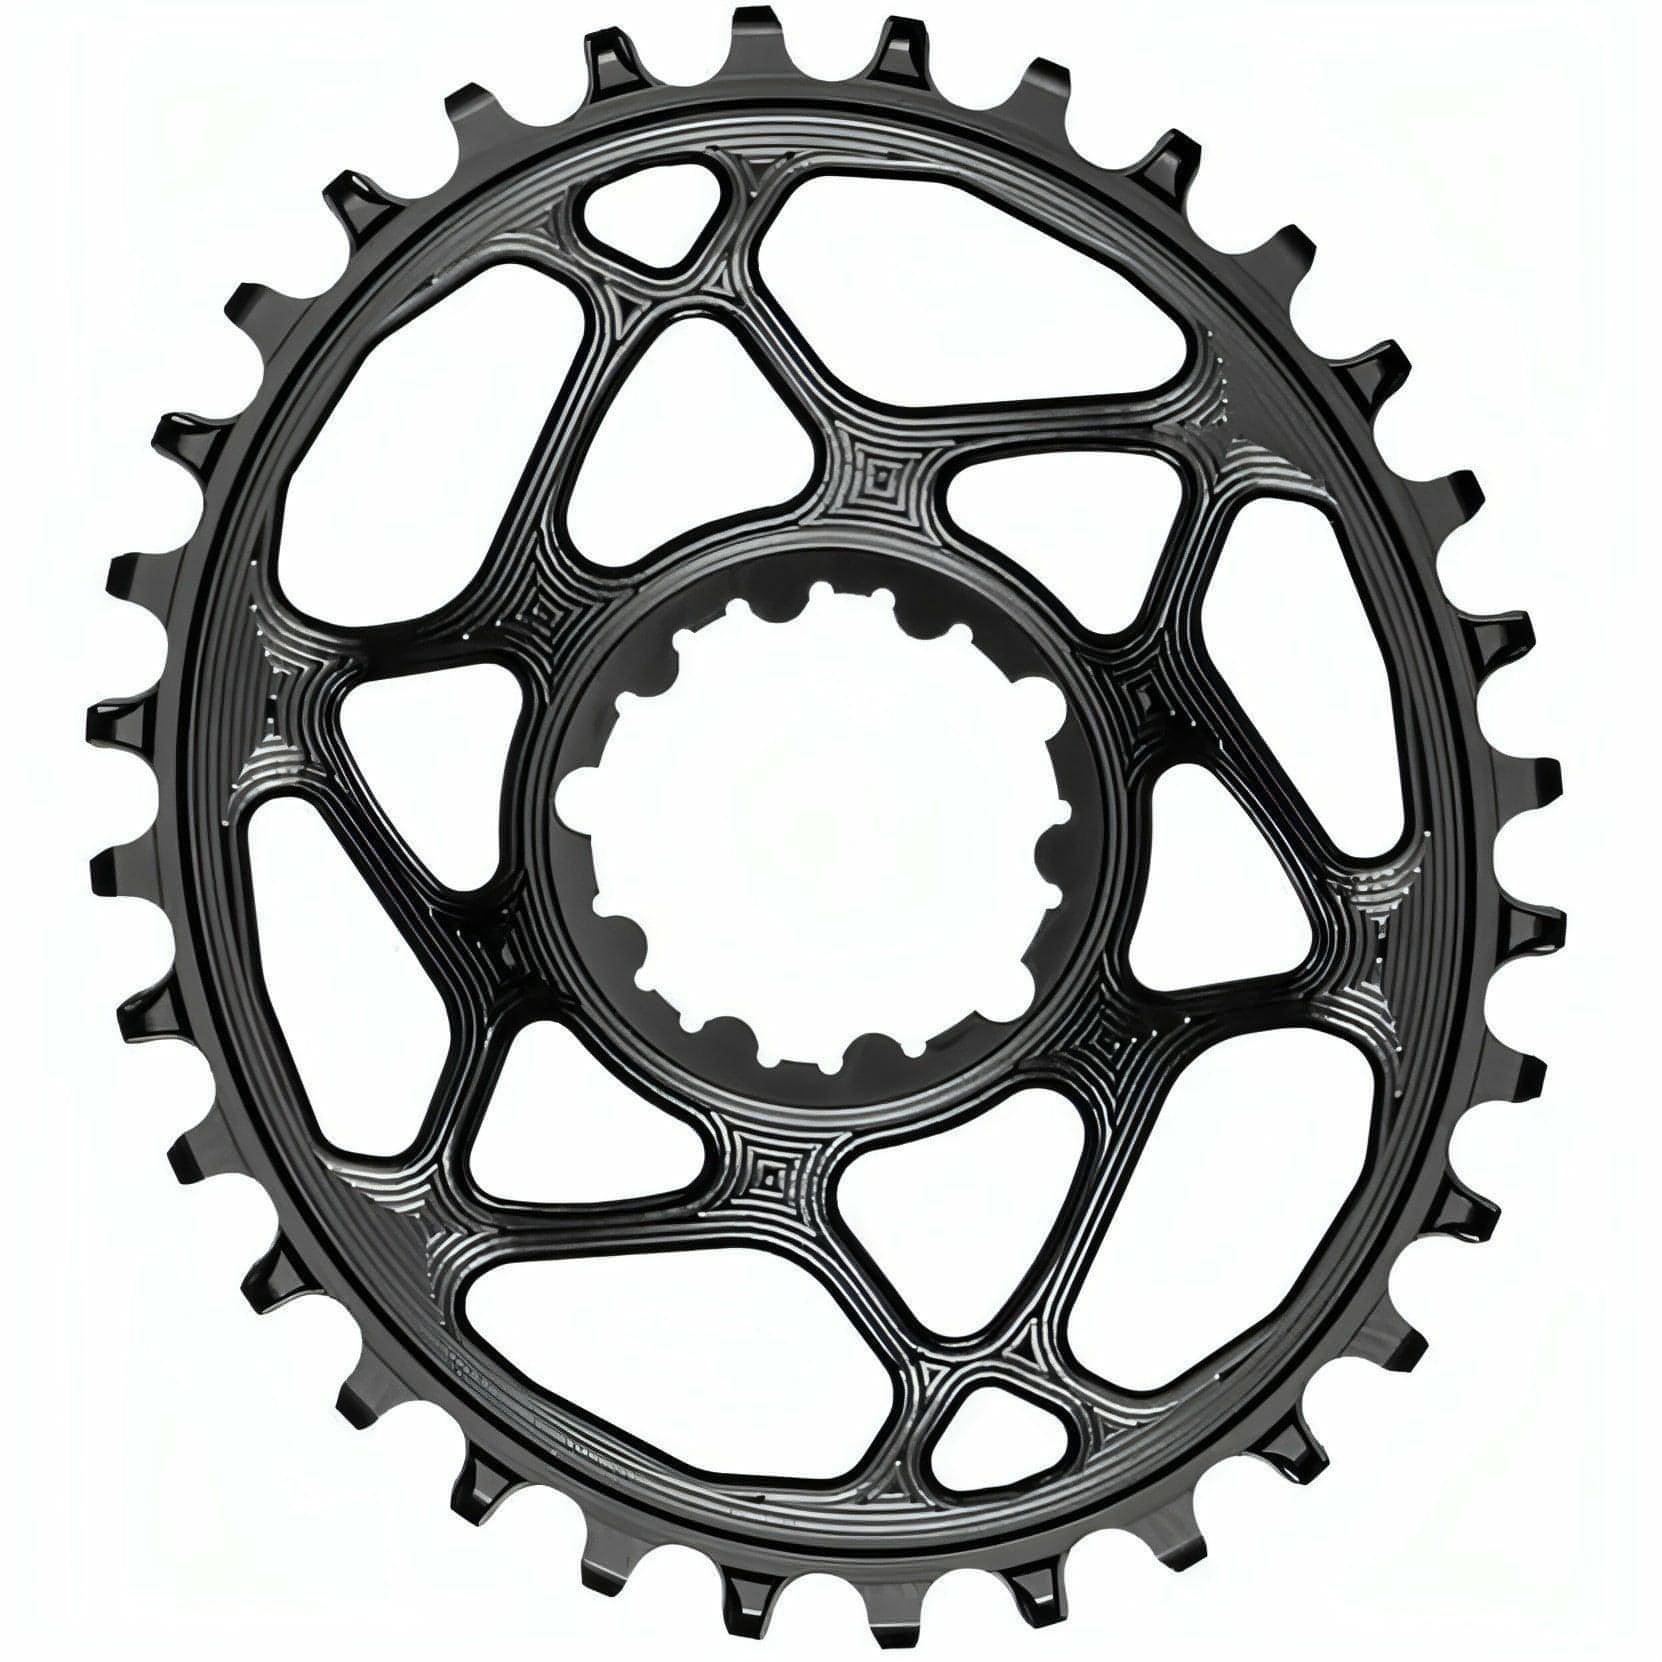 Absolute Black Sram Oval Direct Mount Boost Chainring - Start Fitness